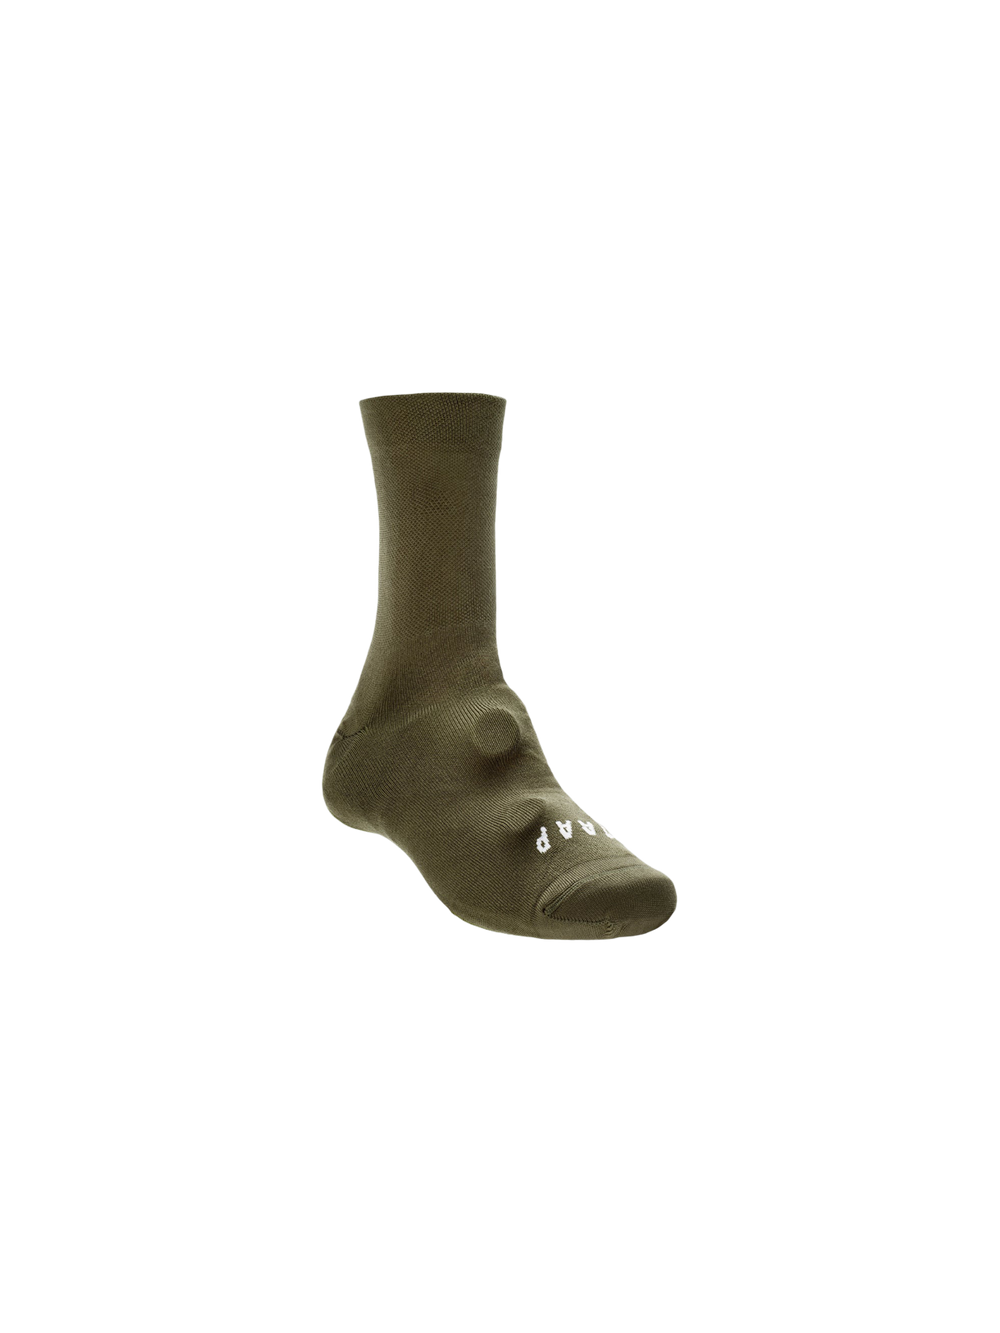 Product Image for Knitted Oversock